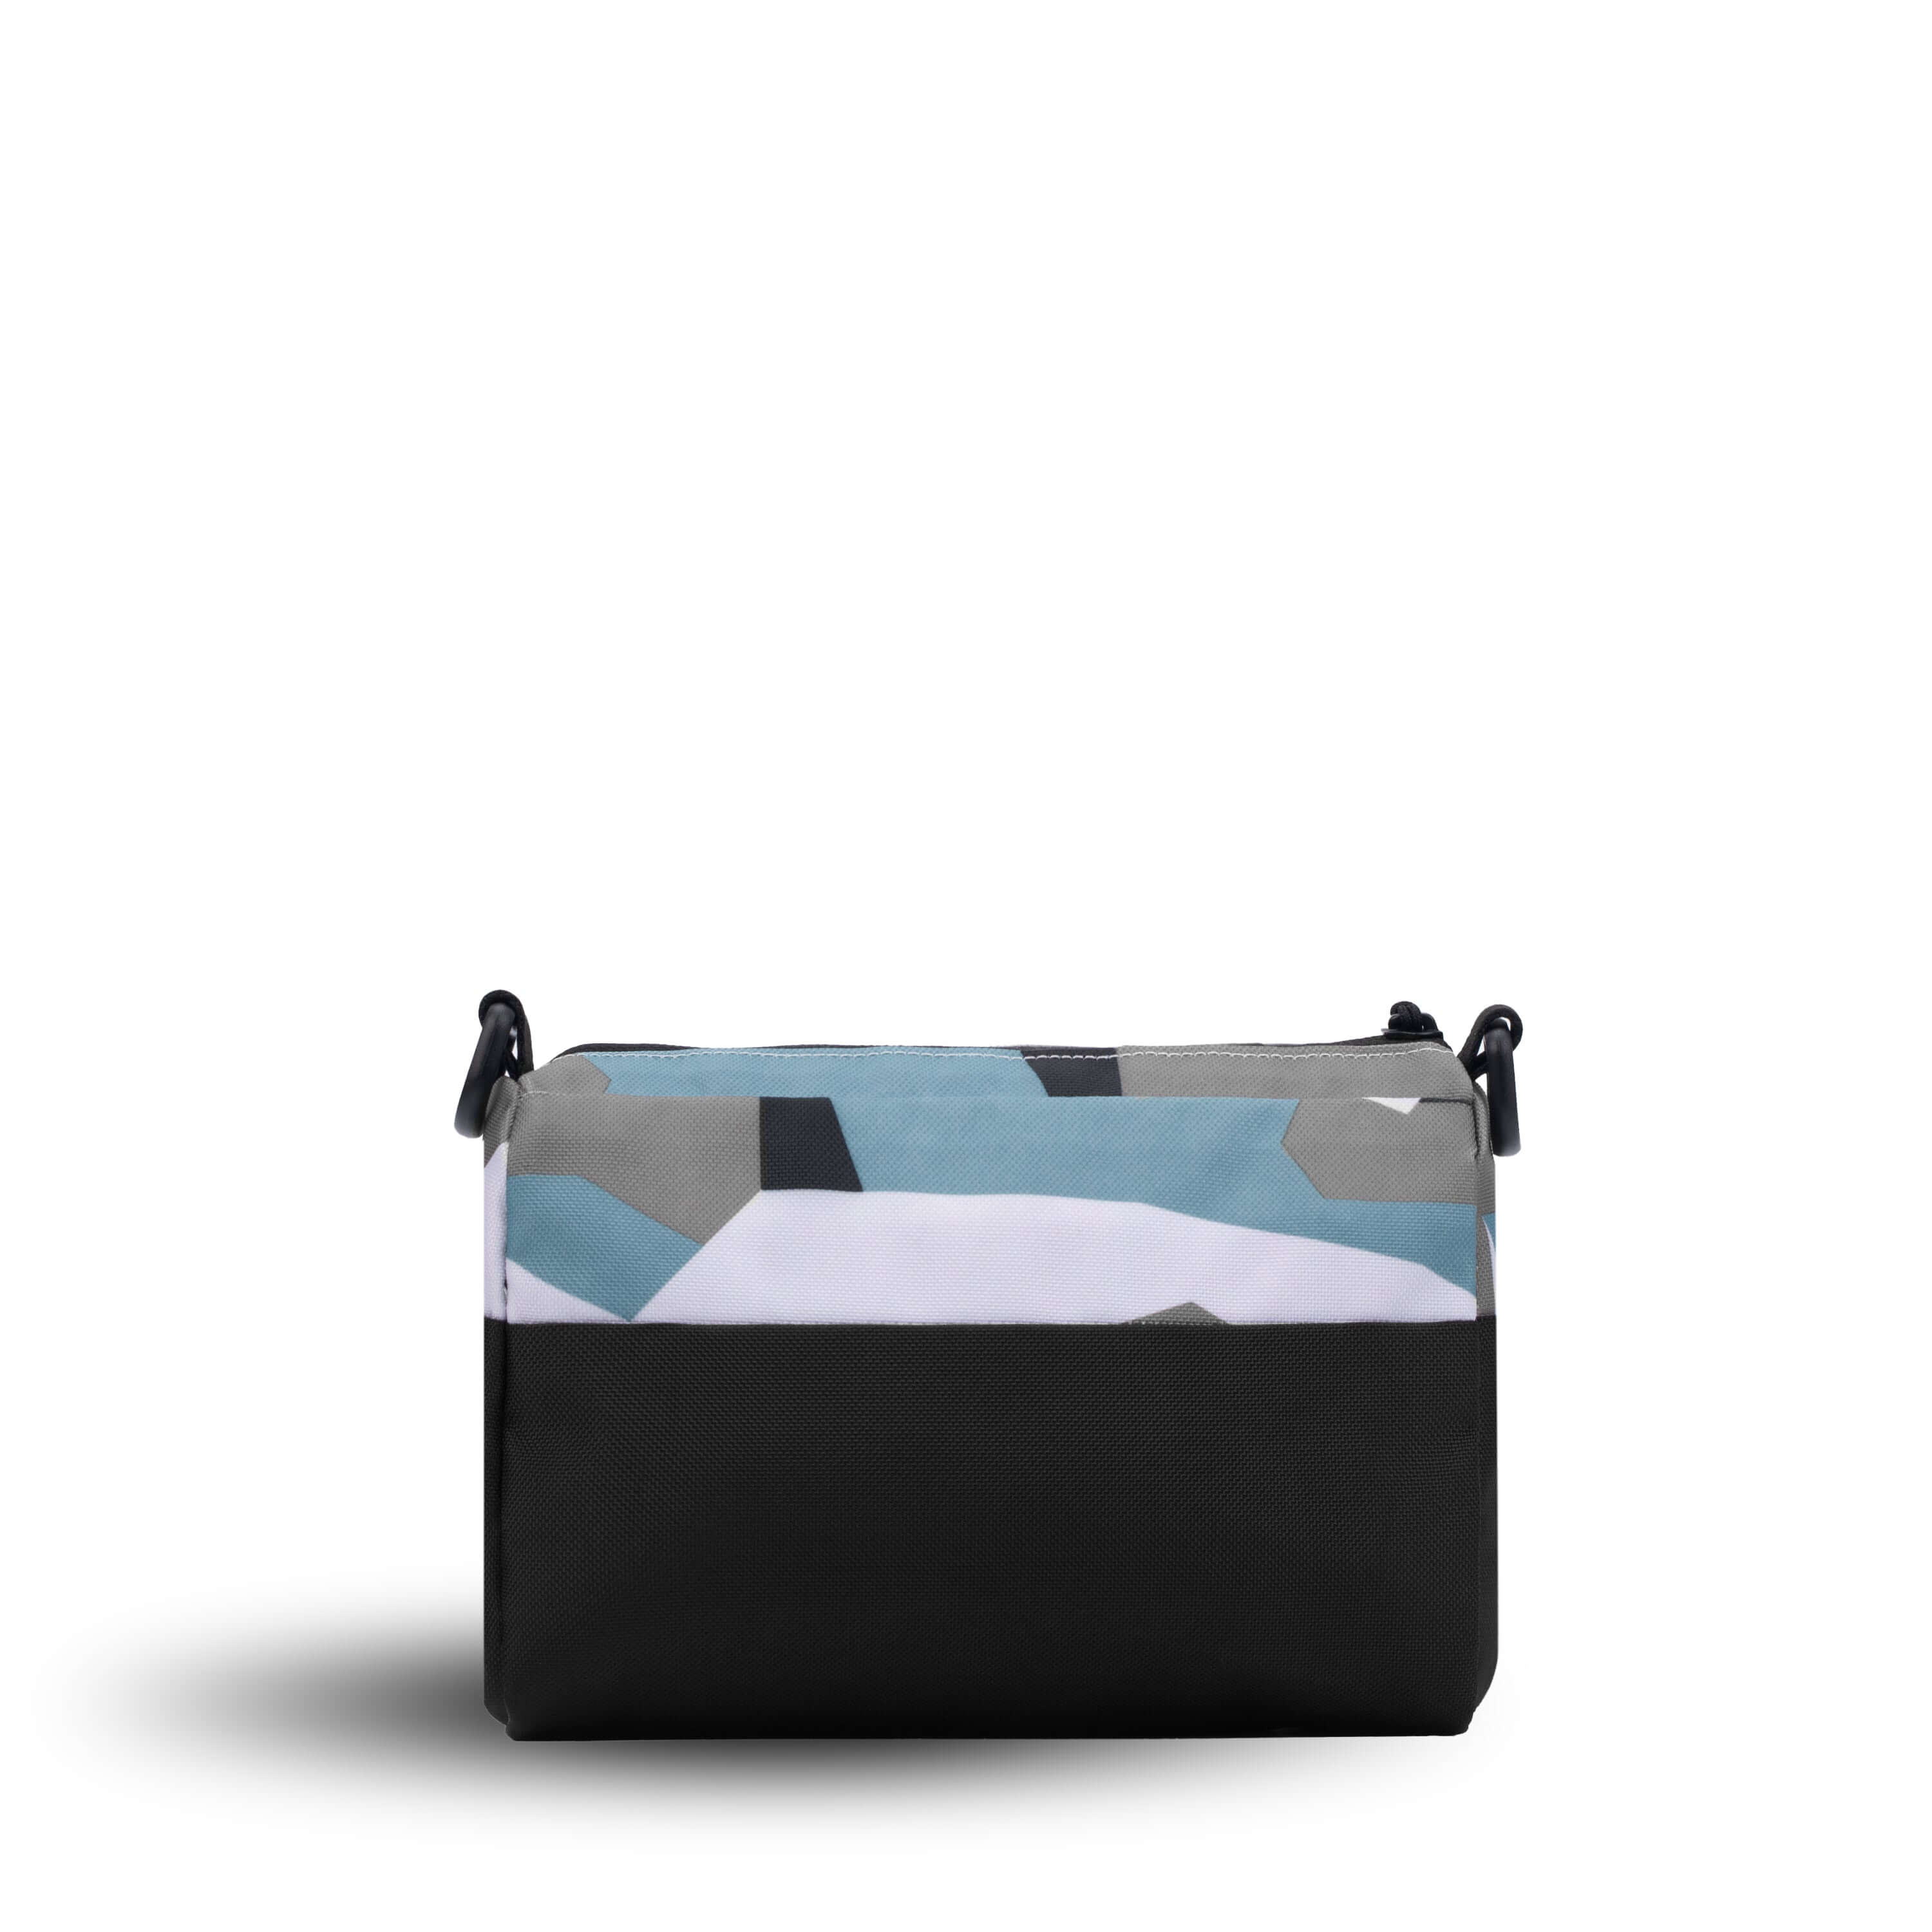 Back view of Sherpani's purse, the Skye in Summer Camo. It is two-toned, the top half of the bag is a camouflage pattern of white, gray and blue, and the bottom half of the bag is black. 